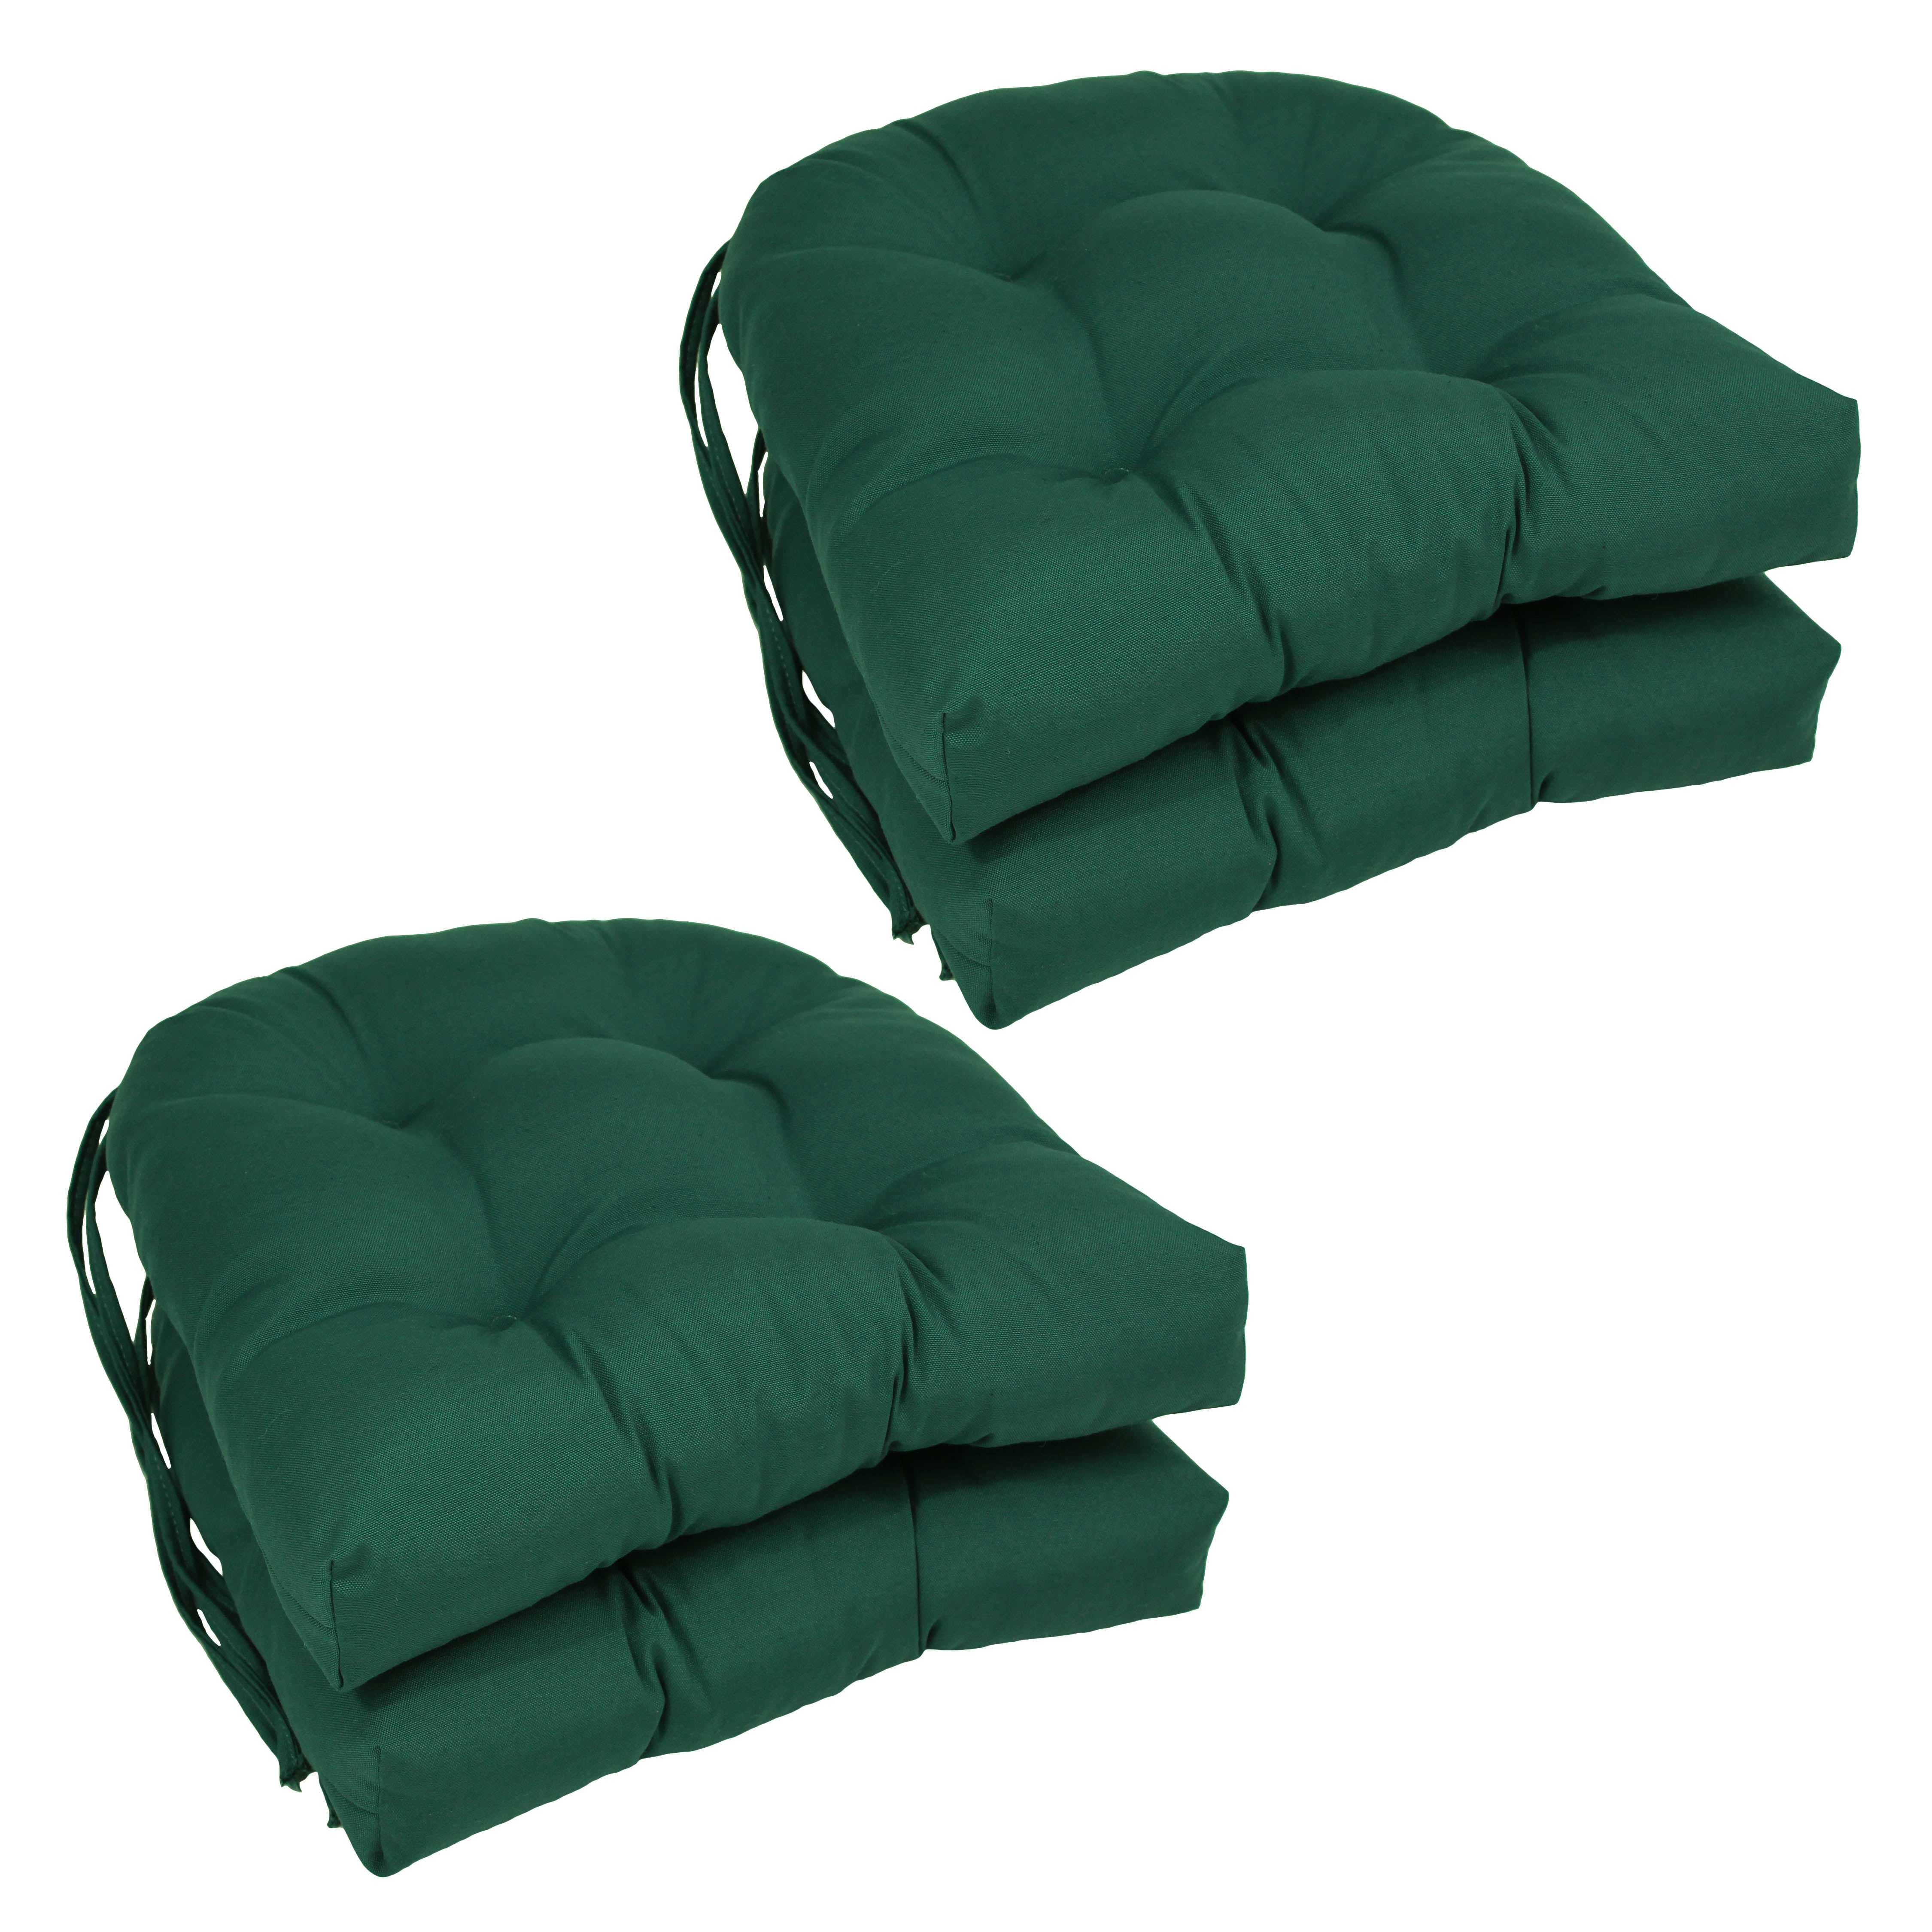 16-inch Solid Twill U-shaped Tufted Chair Cushions (Set of 4) - Forest